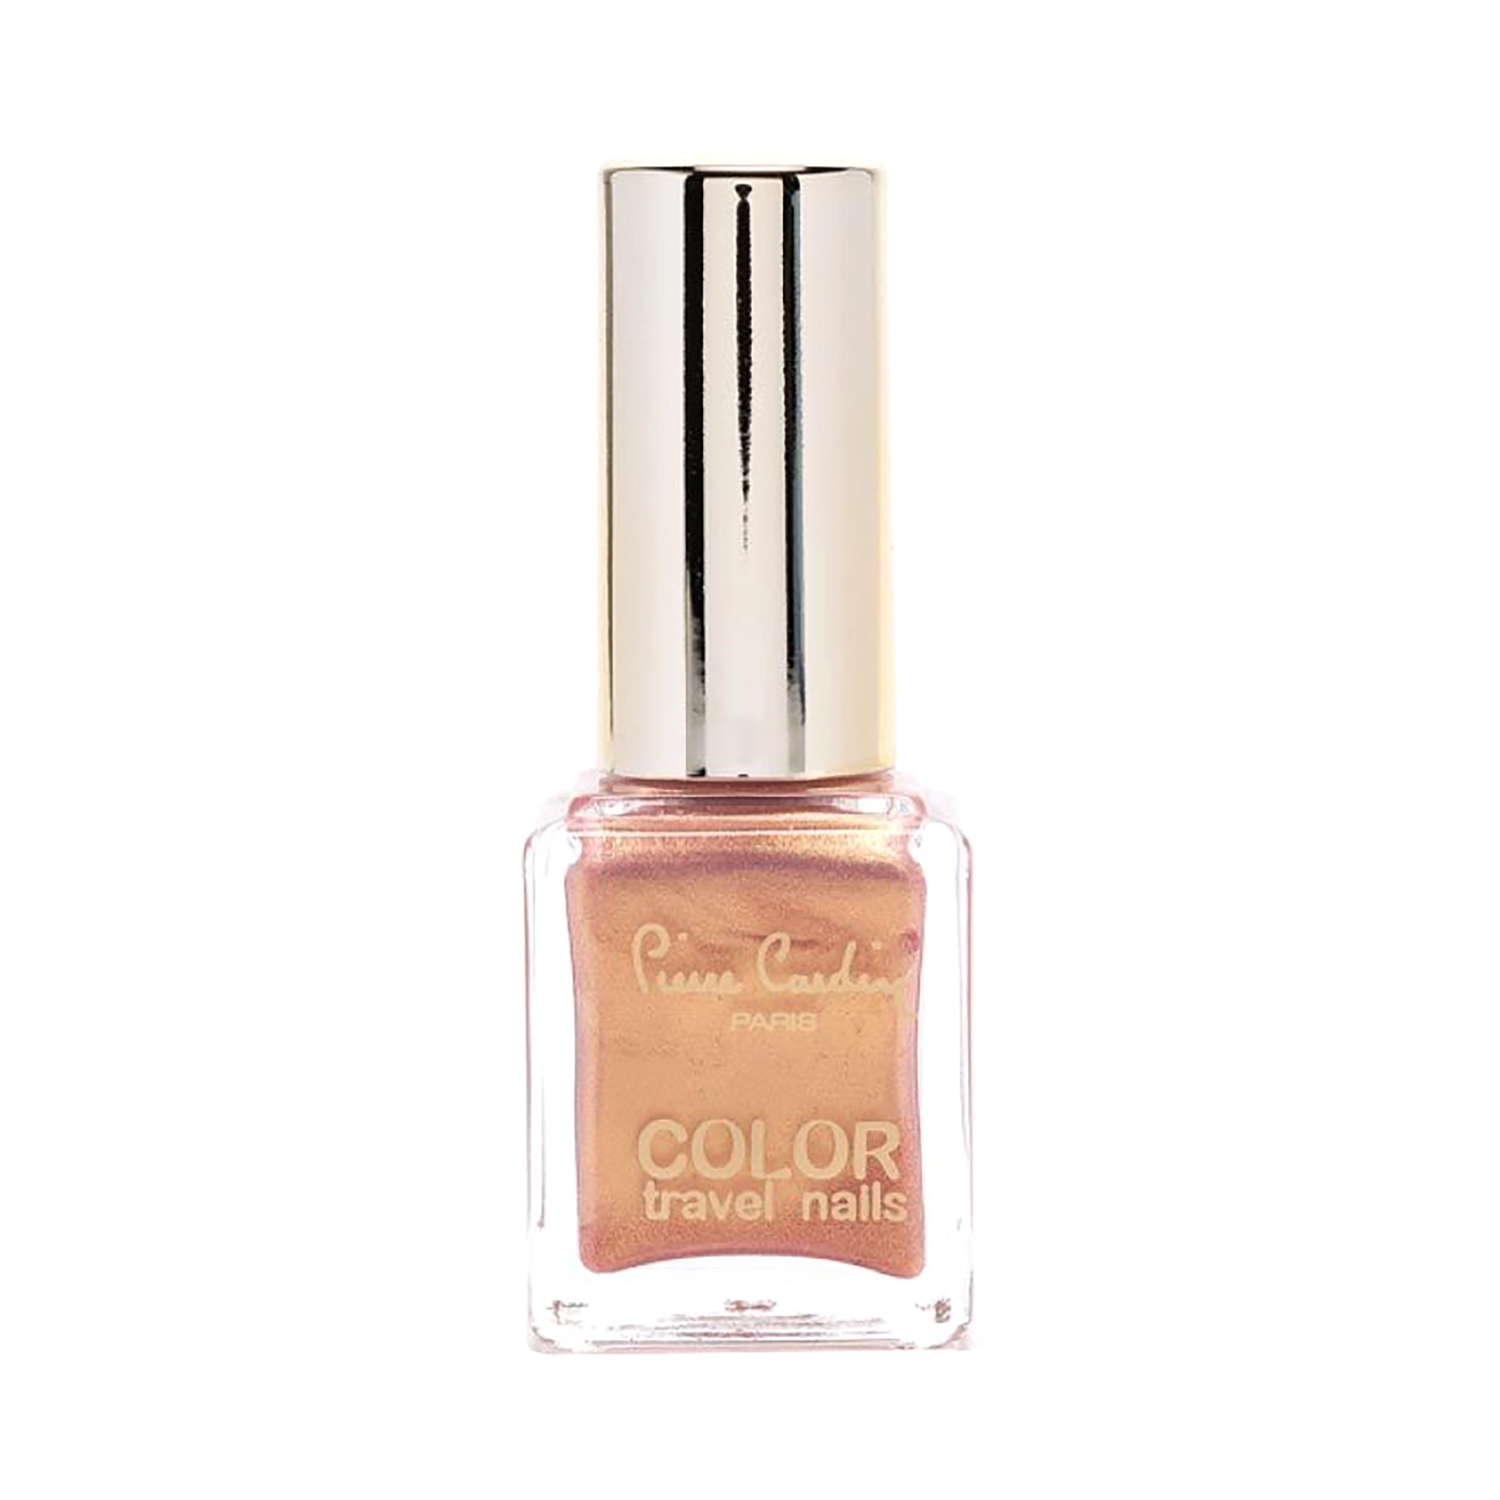 Pierre Cardin Paris Color Travel Nails - 102-Pearly Pink To Yellow (11.5ml)